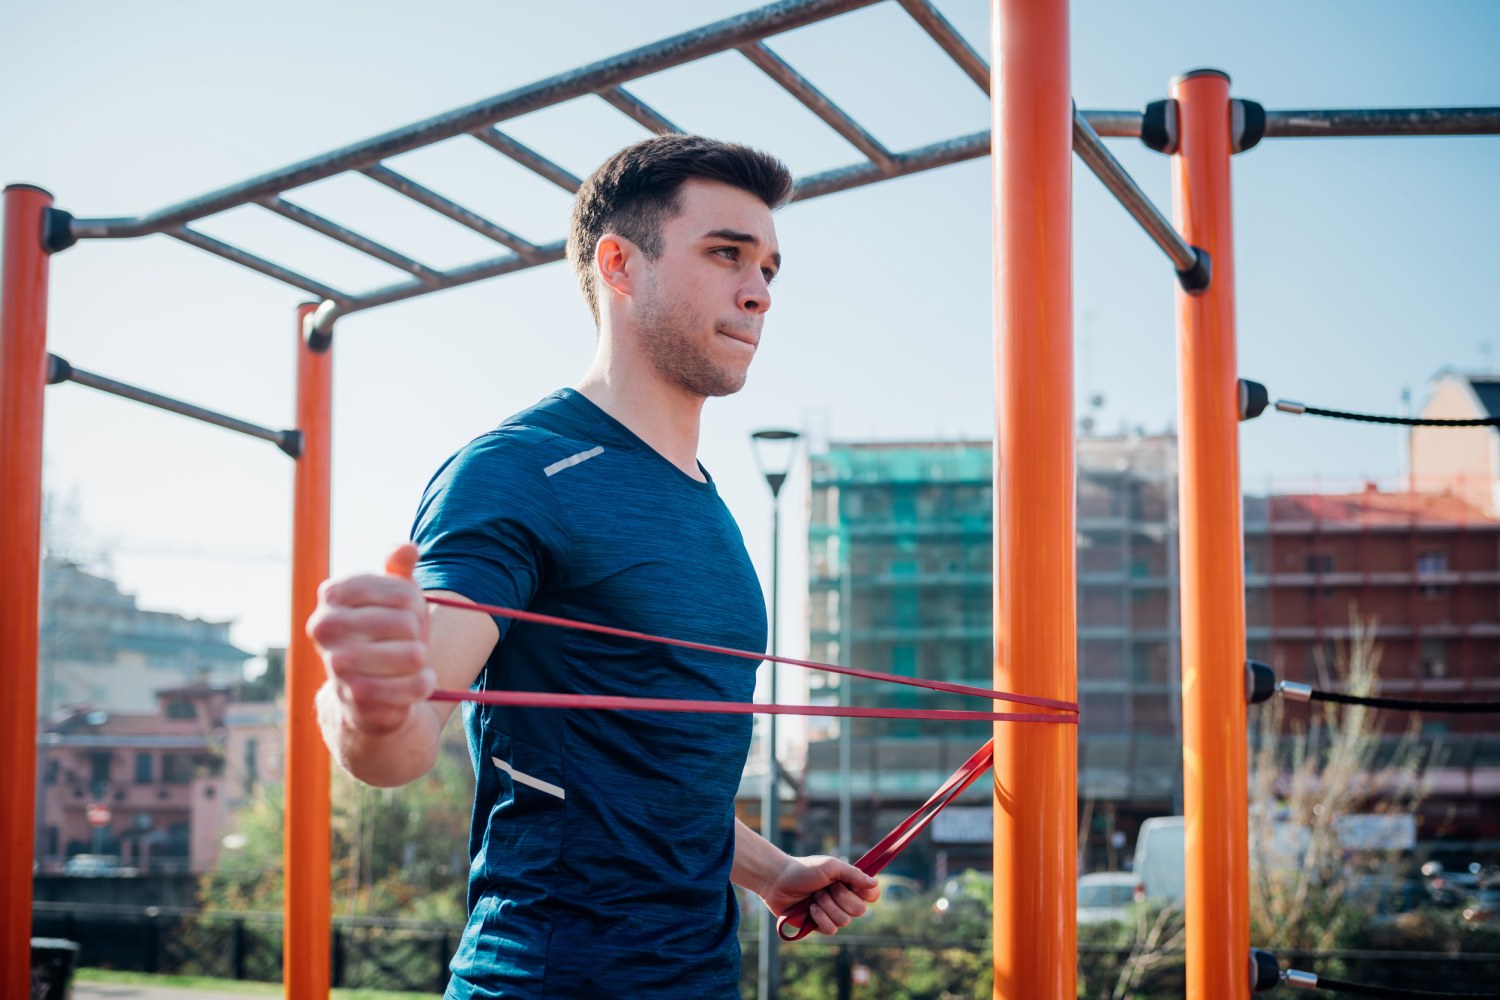 5 surprising ways to use a resistance band to boost your health